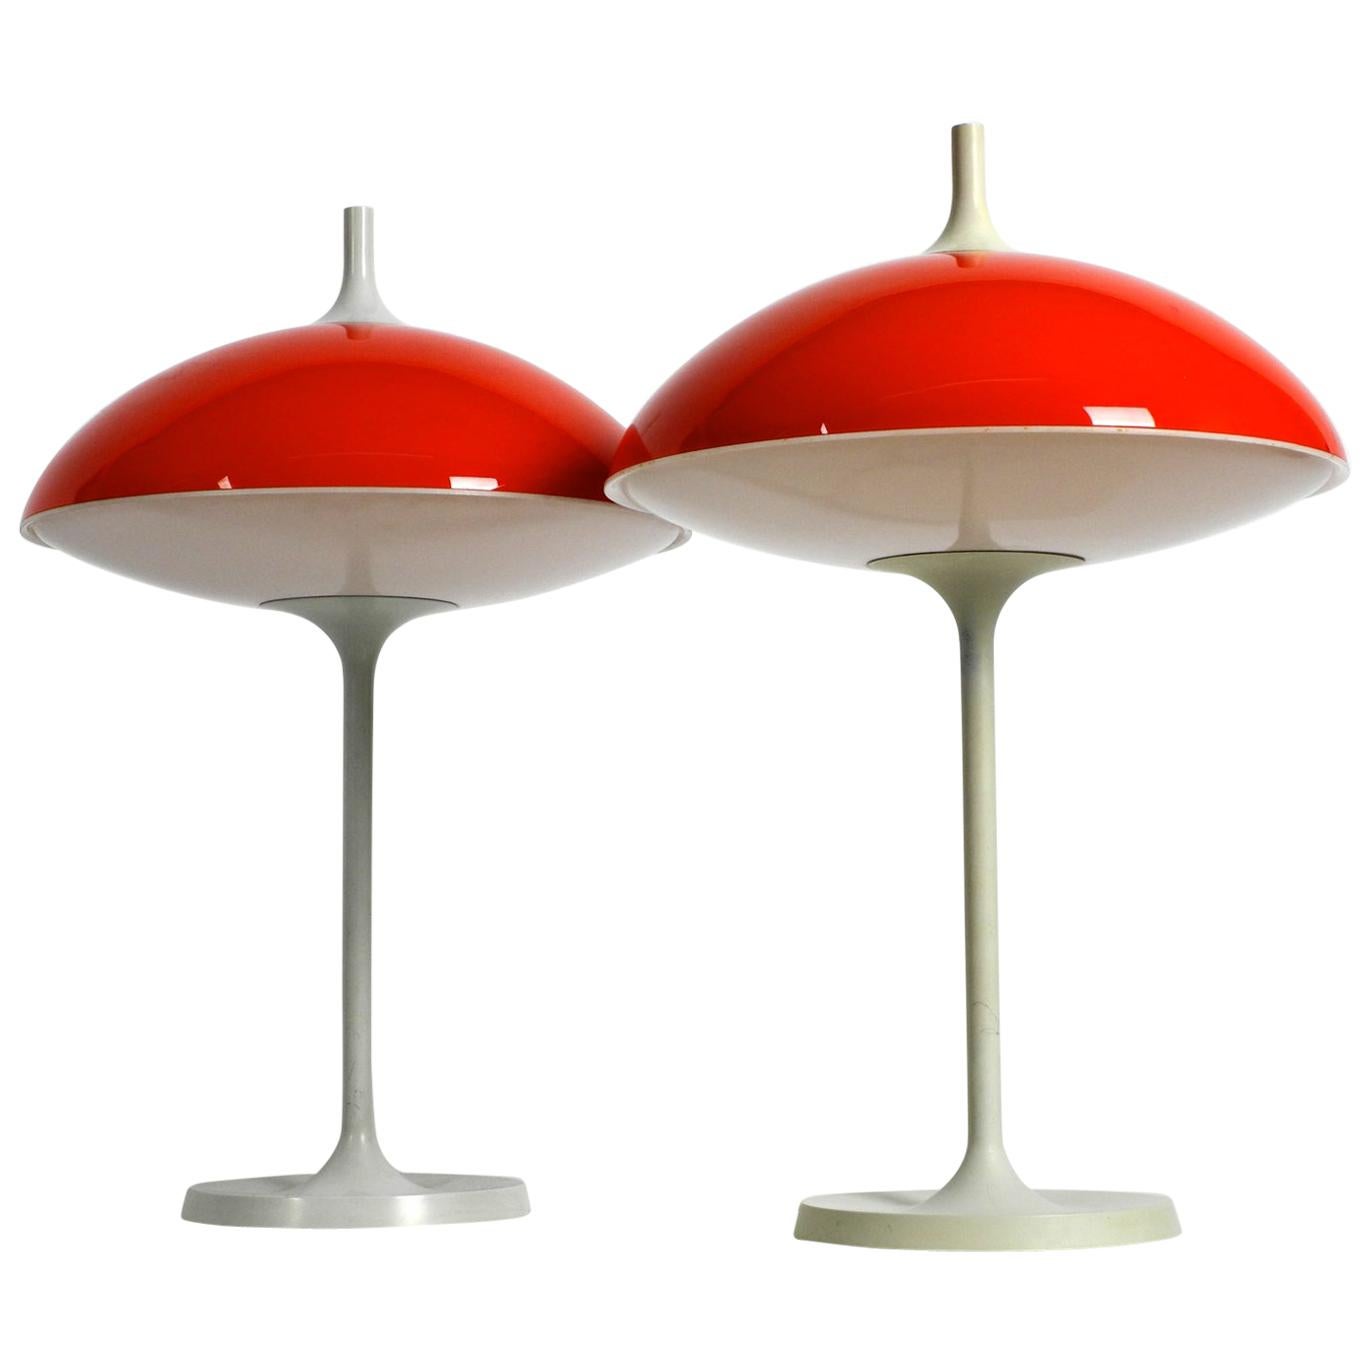 Pair of Large 1960s Pop Art Space Age Table Lamp by Temde Made in Switzerland